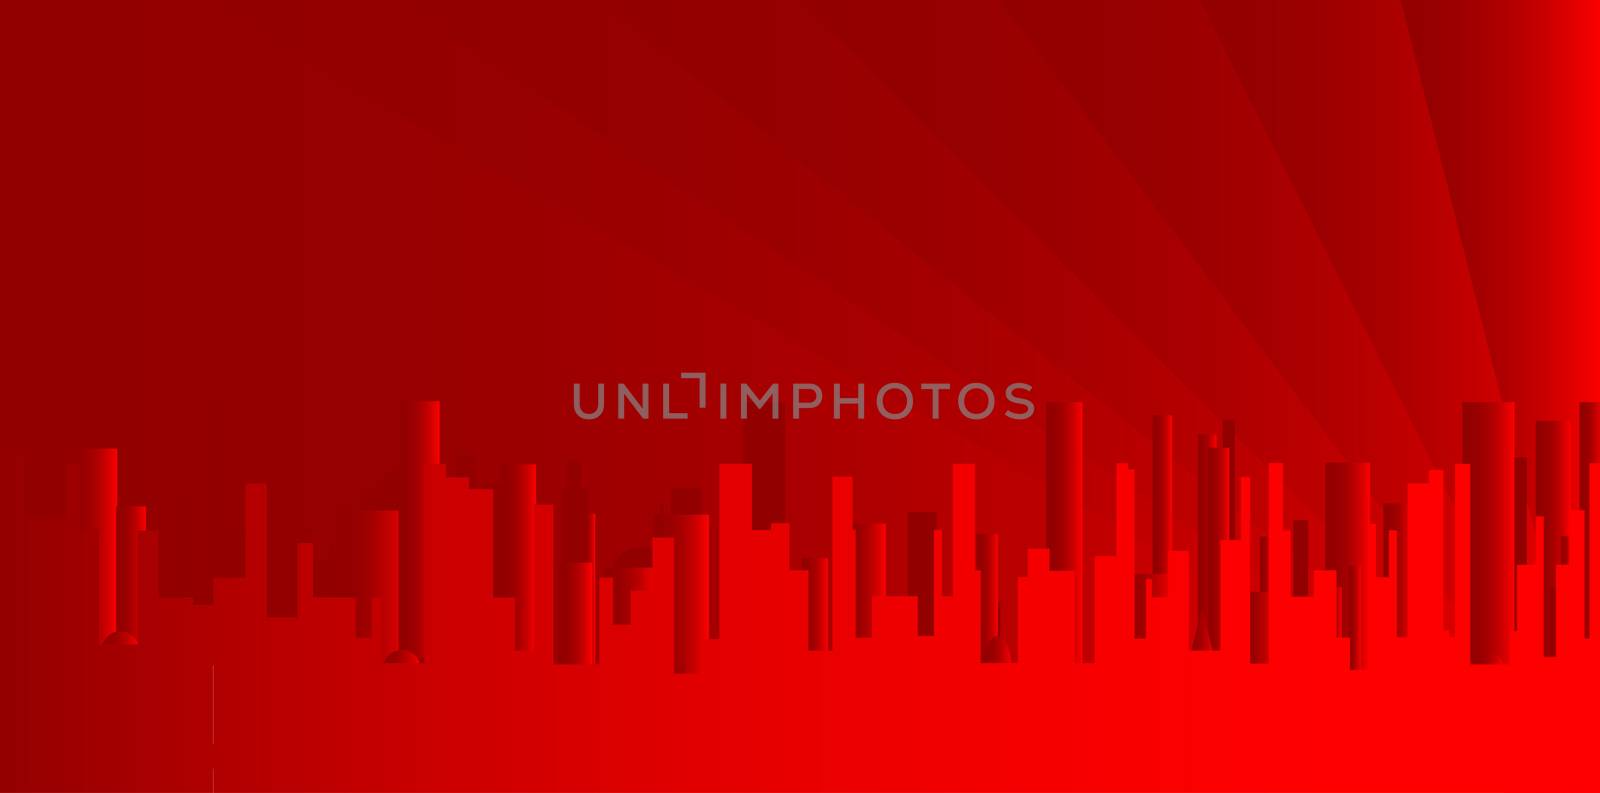 A red cityscape shown in grey and silhouette.